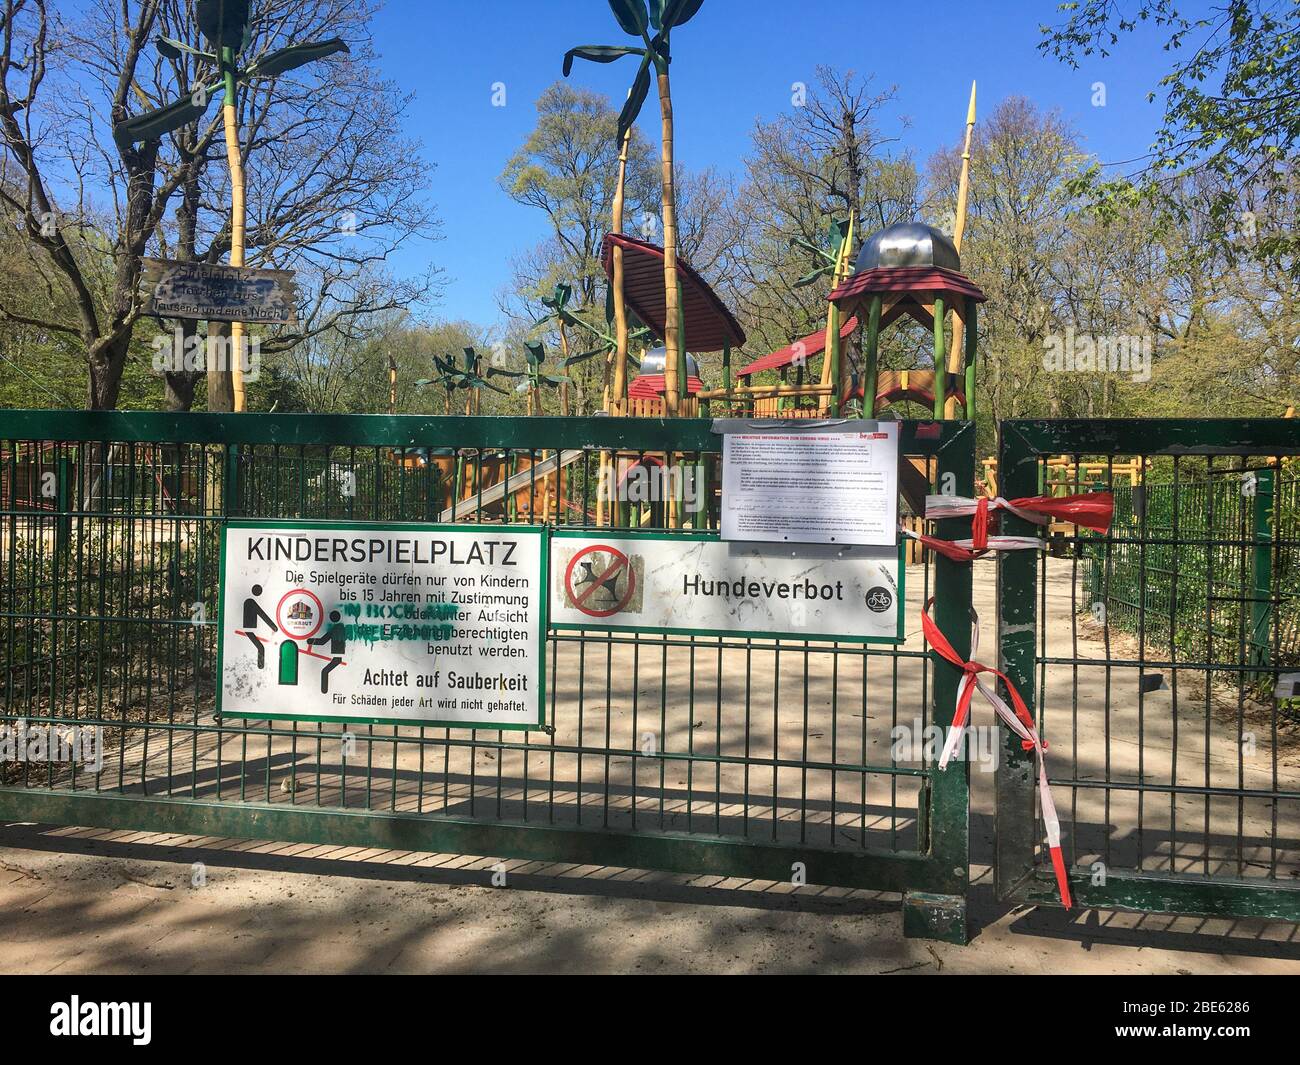 BERLIN, GERMANY - APRIL 12, 2020: Closed Playground in Public Park Hasenheide due to Corona Pandemic (Covid 19) lockdown. Notice by the City of Berlin Stock Photo